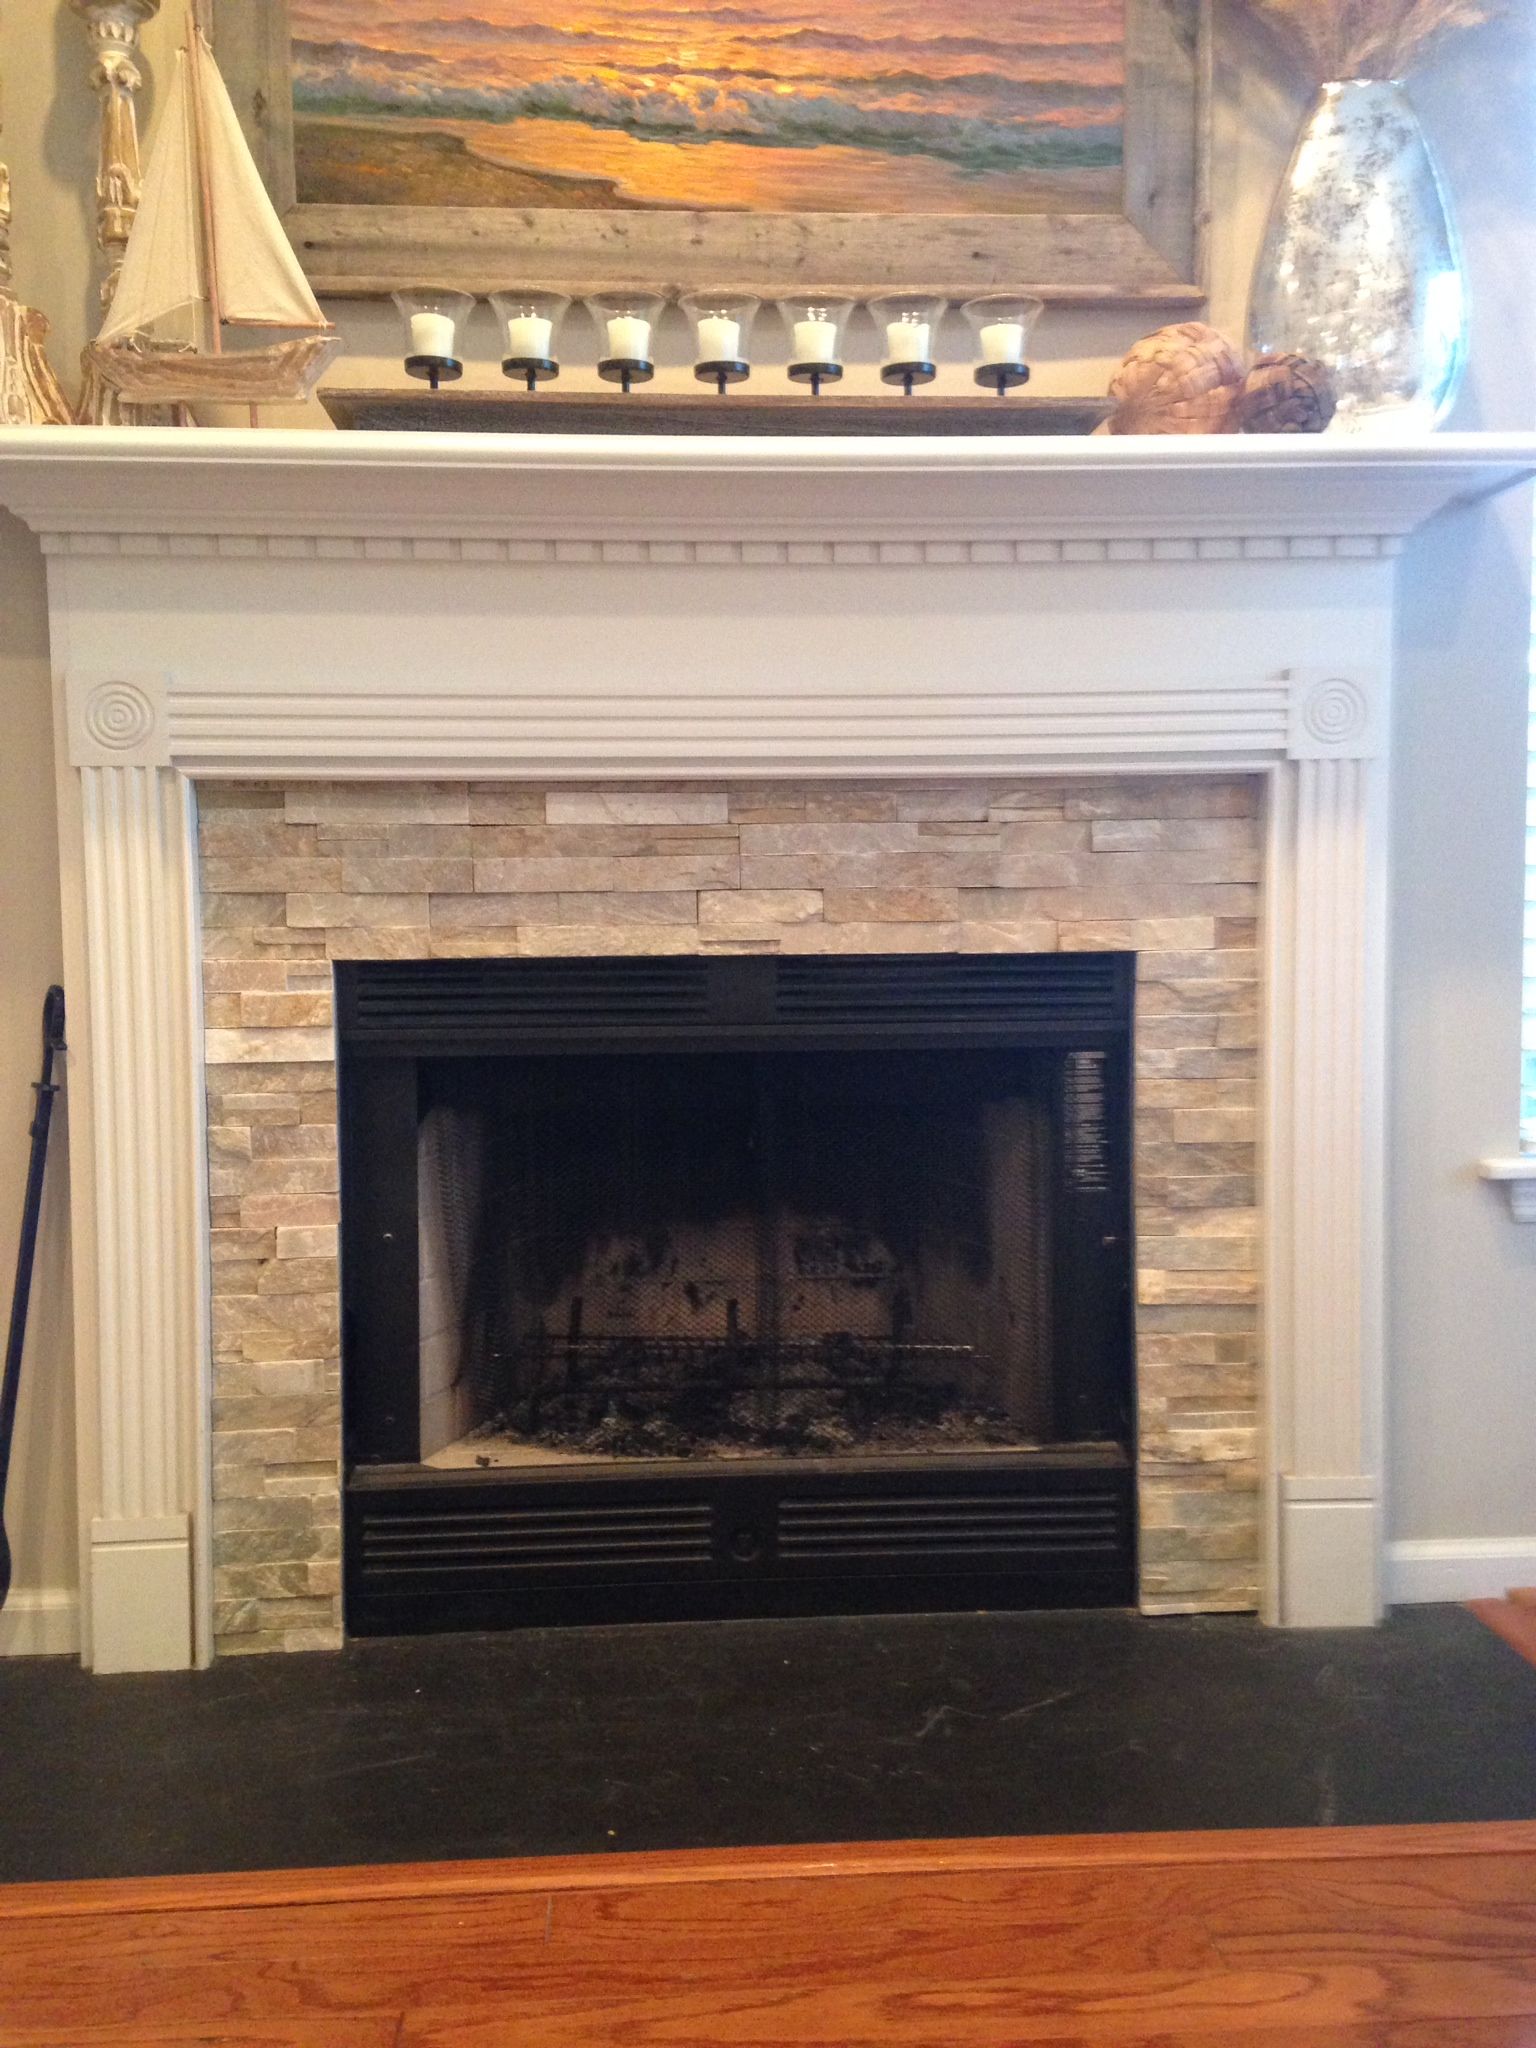 Fireplace Hearth Materials Lovely Fireplace Idea Mantel Wainscoting Design Craftsman